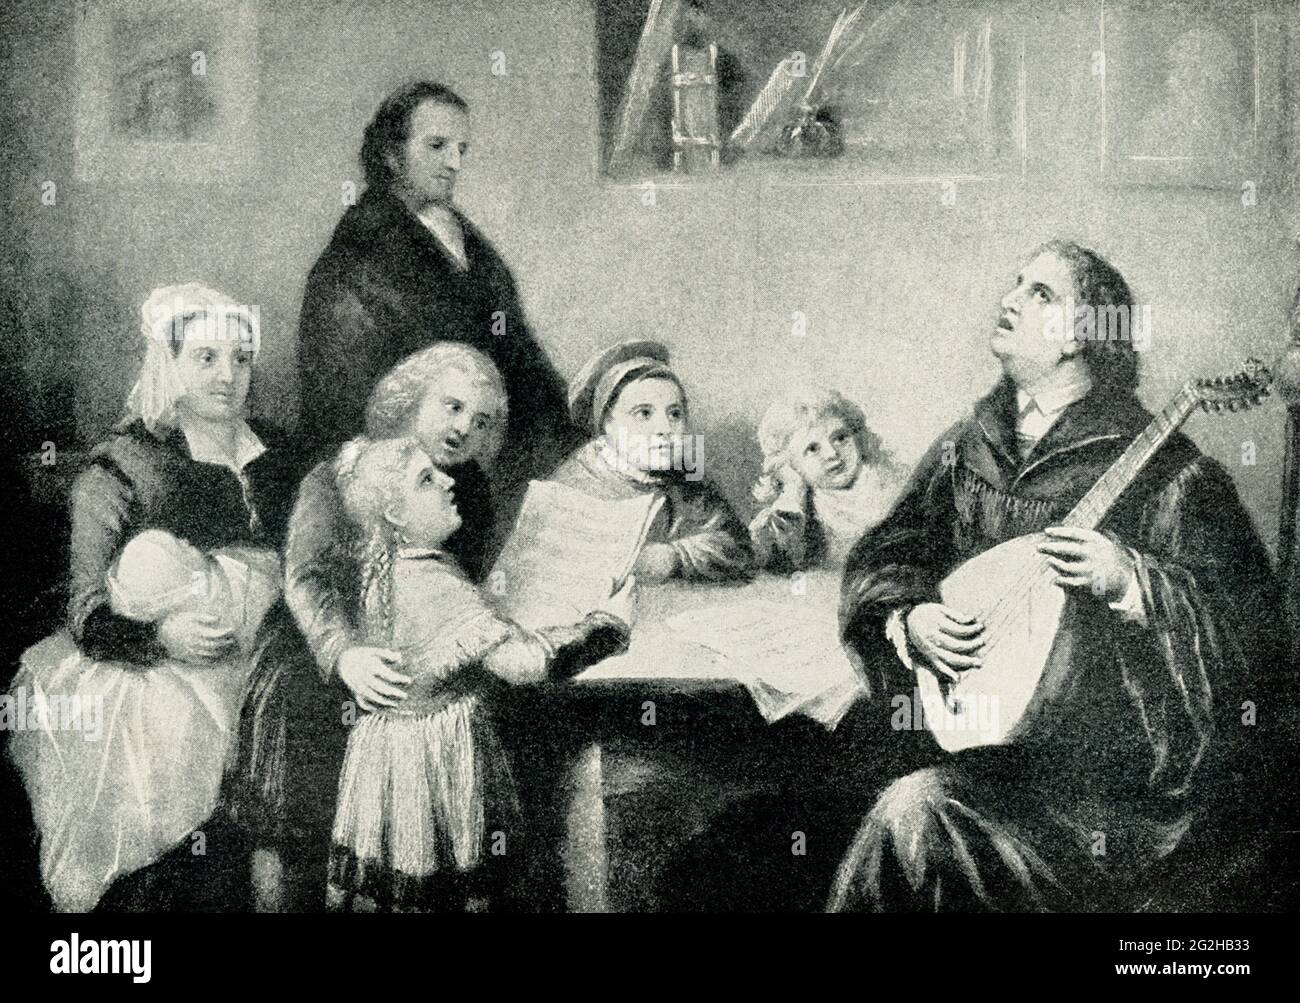 Luther’s Evening at Home. Martin Luther is pictured here at home with his family, singing as he plays his instrument. Martin Luther (1483–1546) was the German leader of the Protestant Reformation. In 1521, he was formally excommunicated from the Roman Catholic Church and summoned before the Diet of Worms. The Diet had been called by Emperor Charles V and, among other matters, took up the doctrines spread by Luther. Luther arrived under safe conduct on April 16, refused to yield ground in lengthy arguments with theologians. Katarina von Bora (1499-1552) was the wife of Martin Luther, and they h Stock Photo